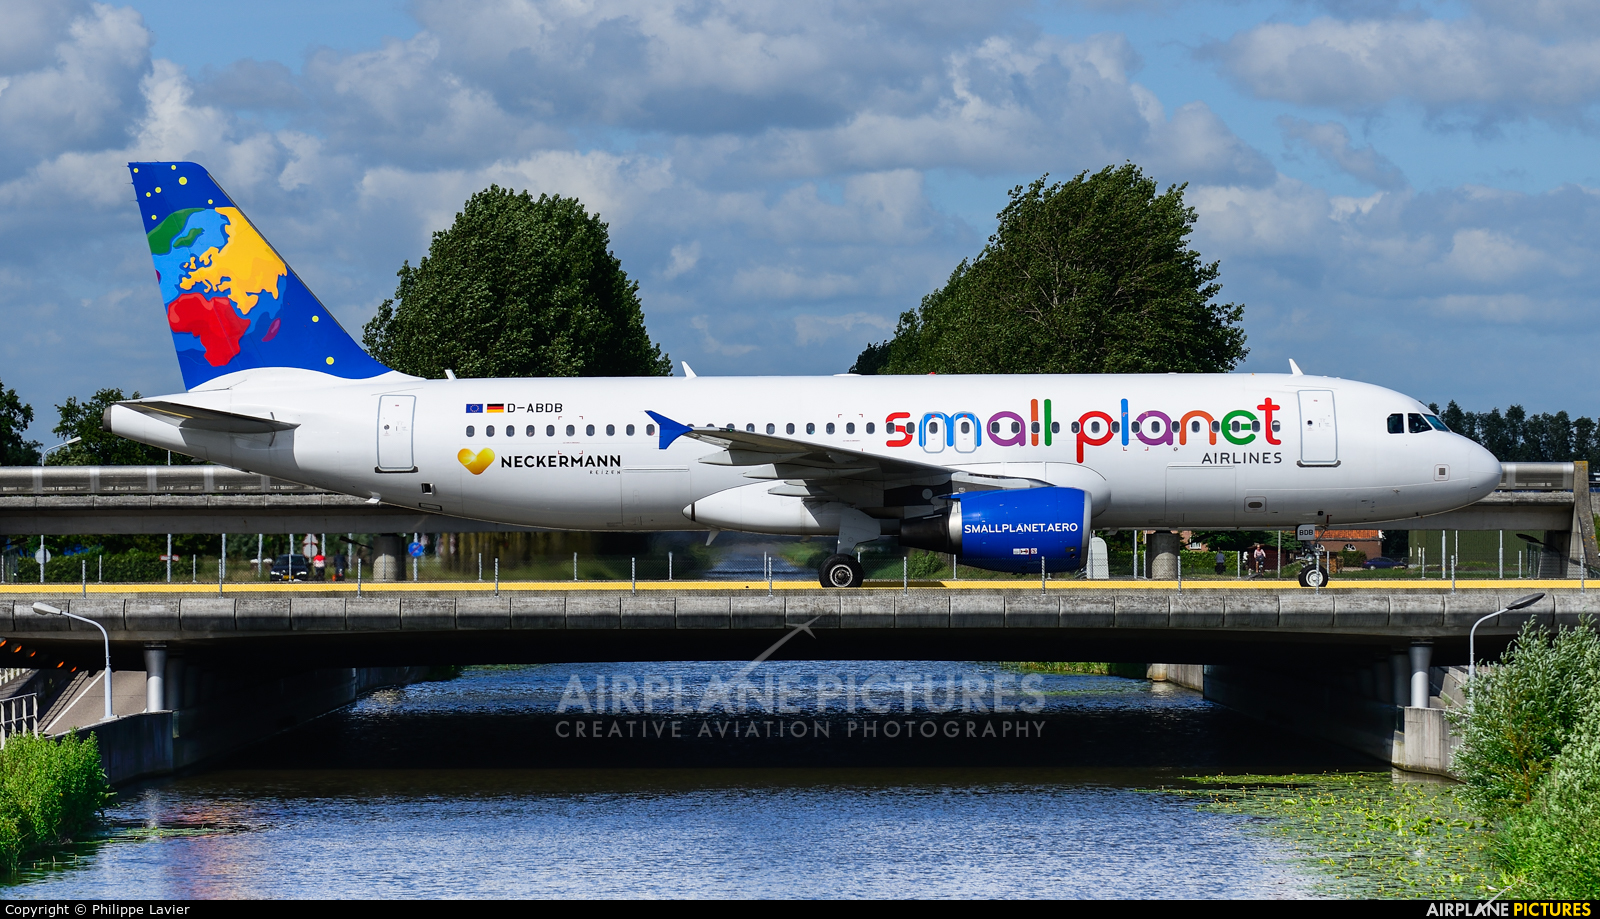 Small Planet Airlines D-ABDB aircraft at Amsterdam - Schiphol